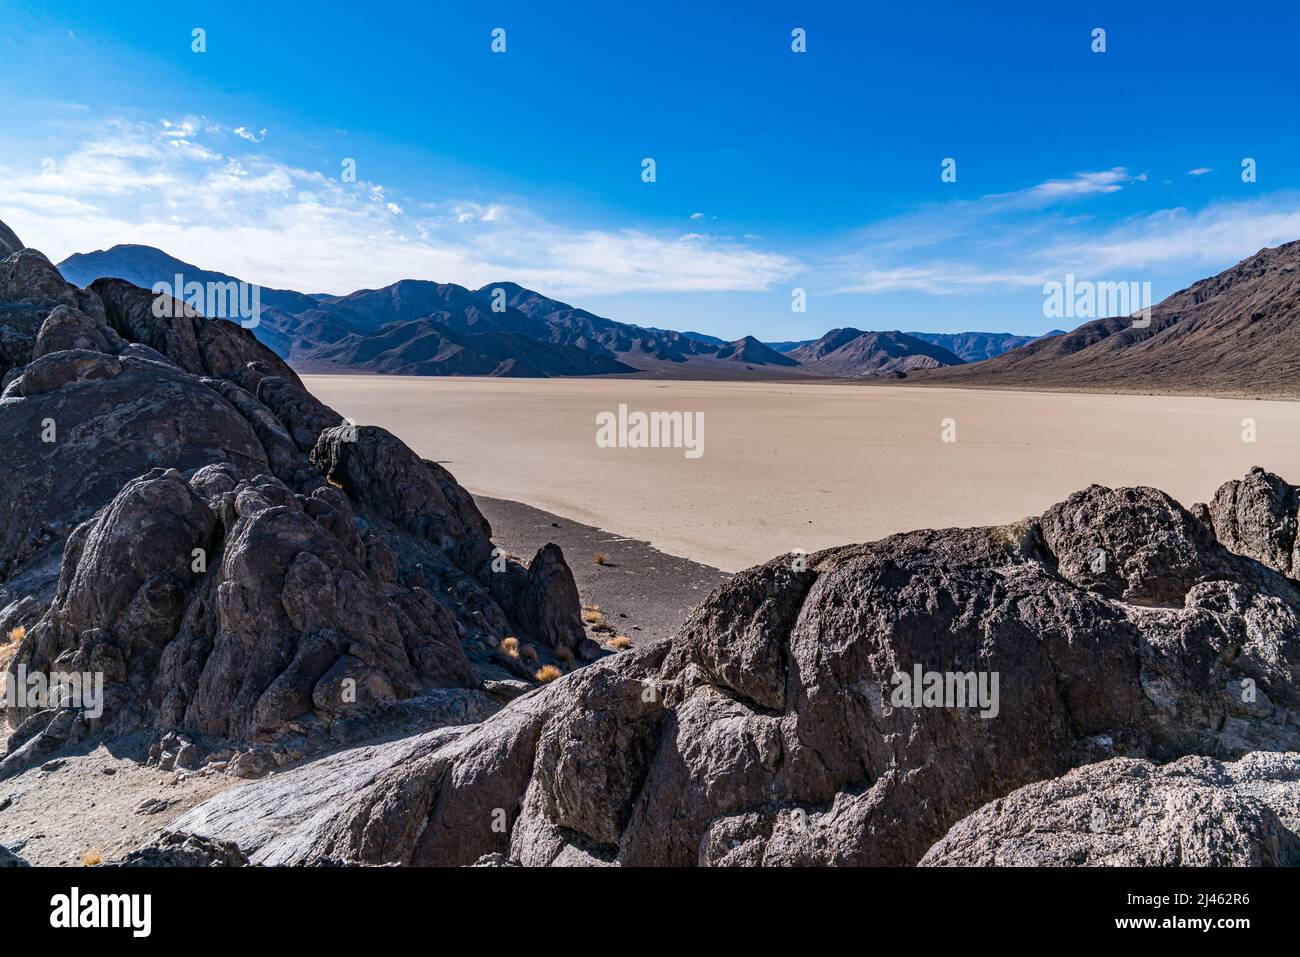 Rock island on the dry lake bed of the Racetrack Playa in Death Valley National Park Stock Photo